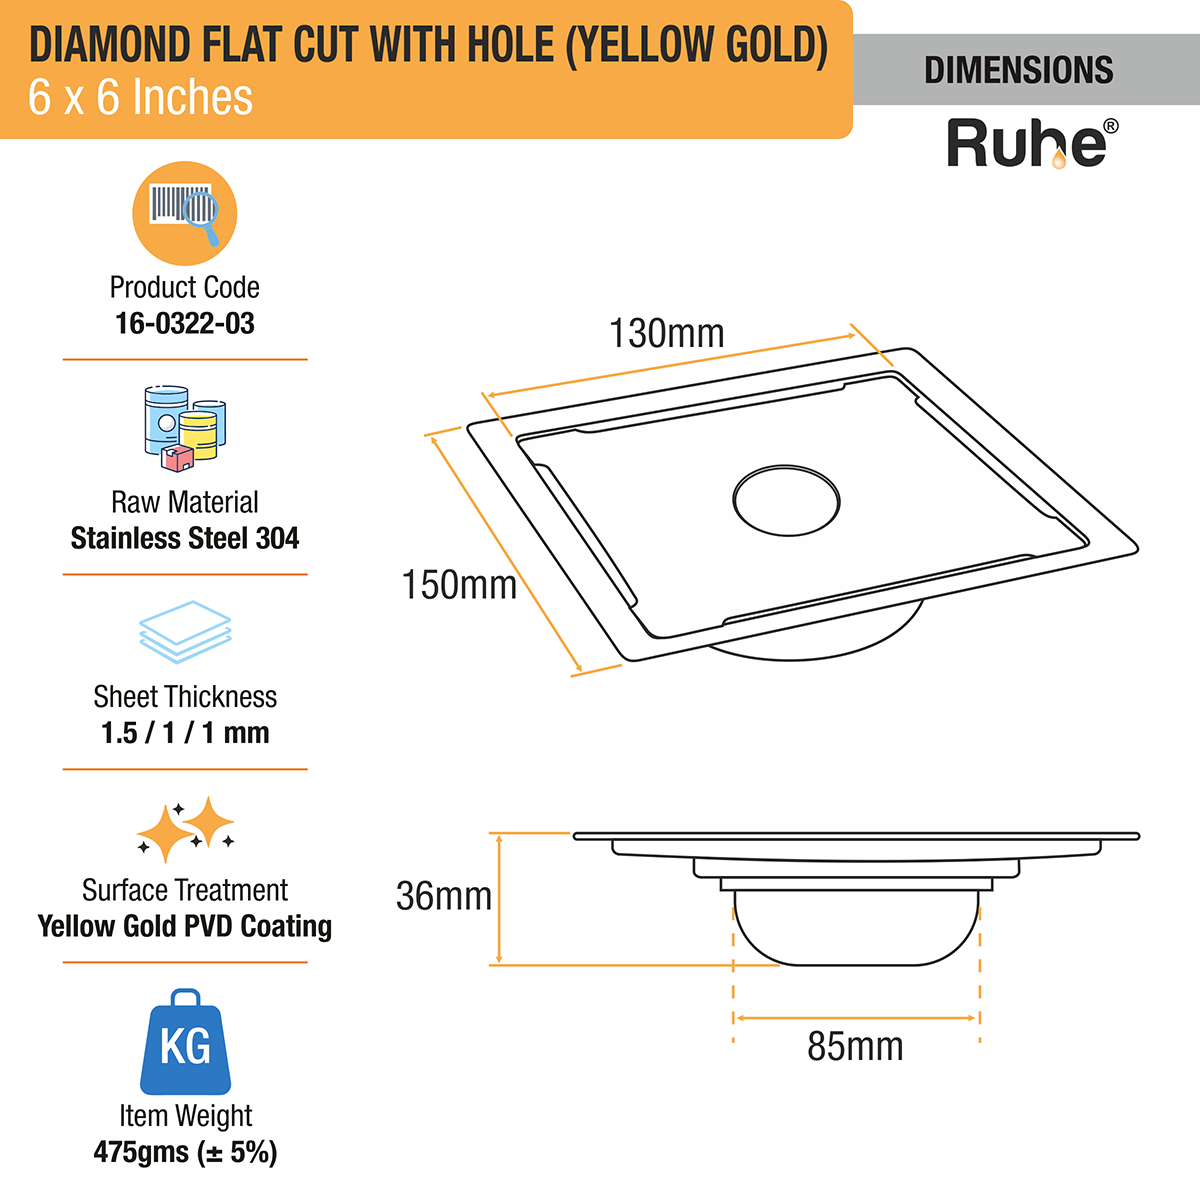 Diamond Square Flat Cut Floor Drain in Yellow Gold PVD Coating (6 x 6 Inches) with Hole dimensions and sizes